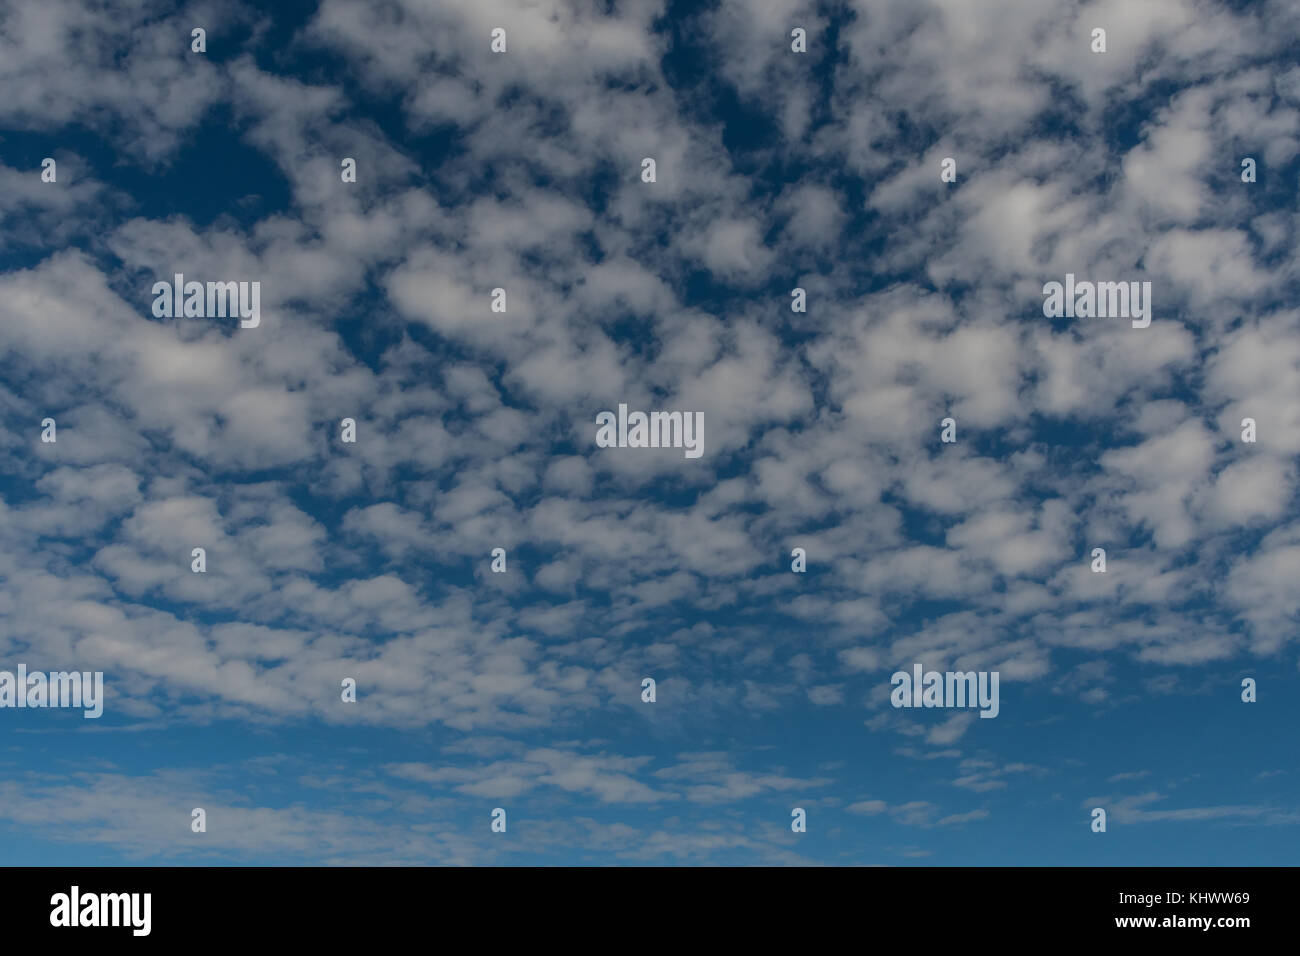 Puffy Field of Clouds on Blue Sky Background Image Stock Photo